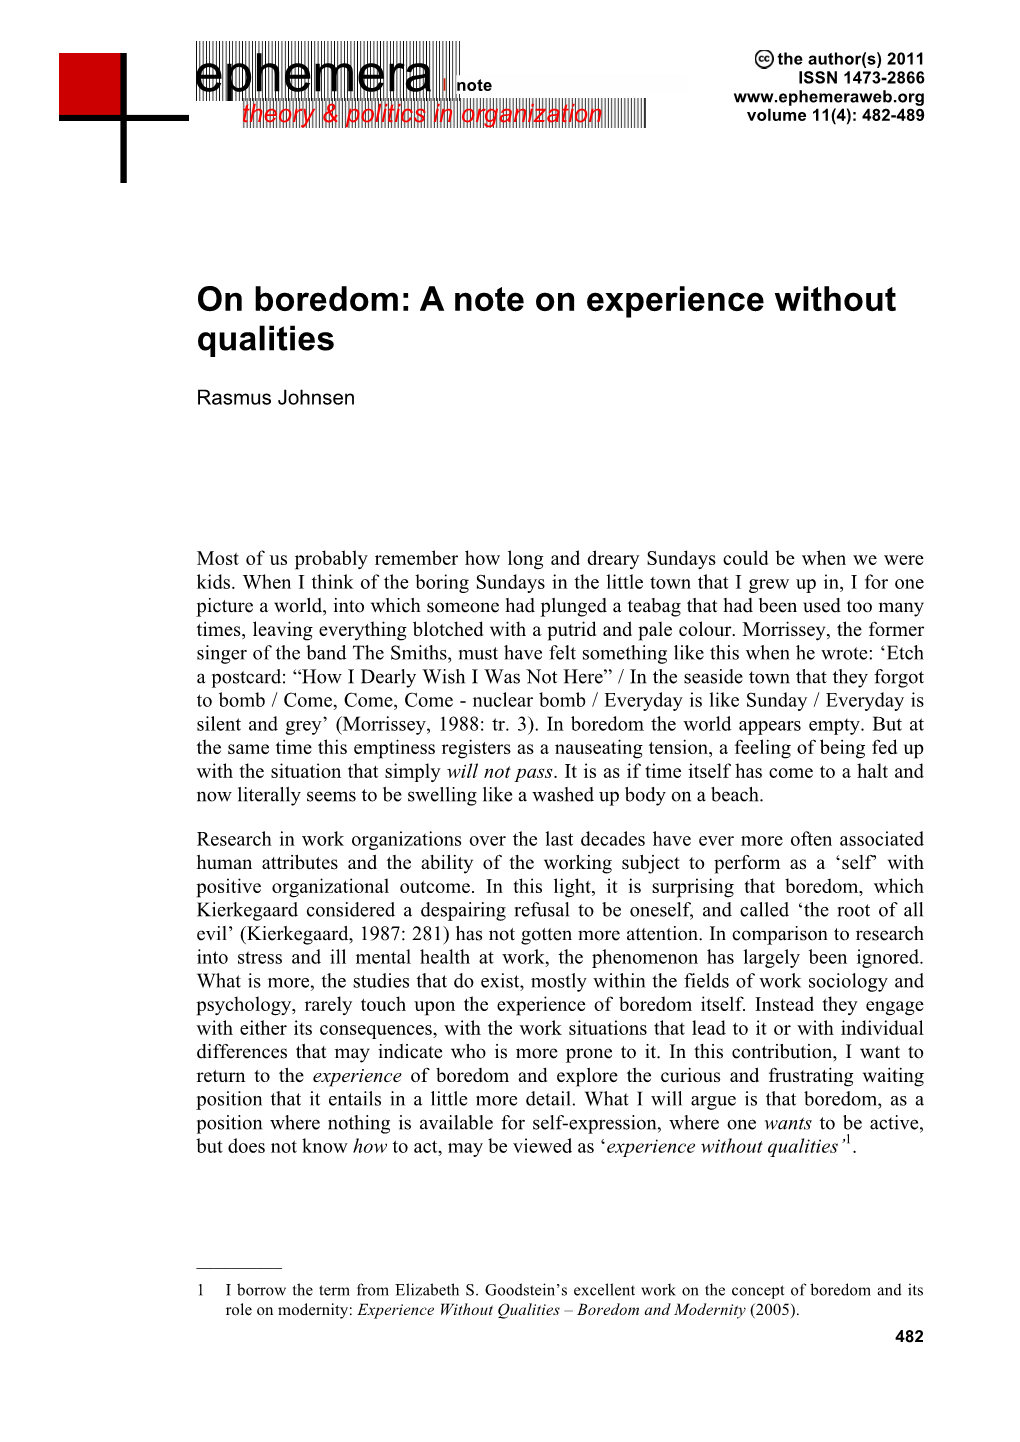 On Boredom: a Note on Experience Without Qualities